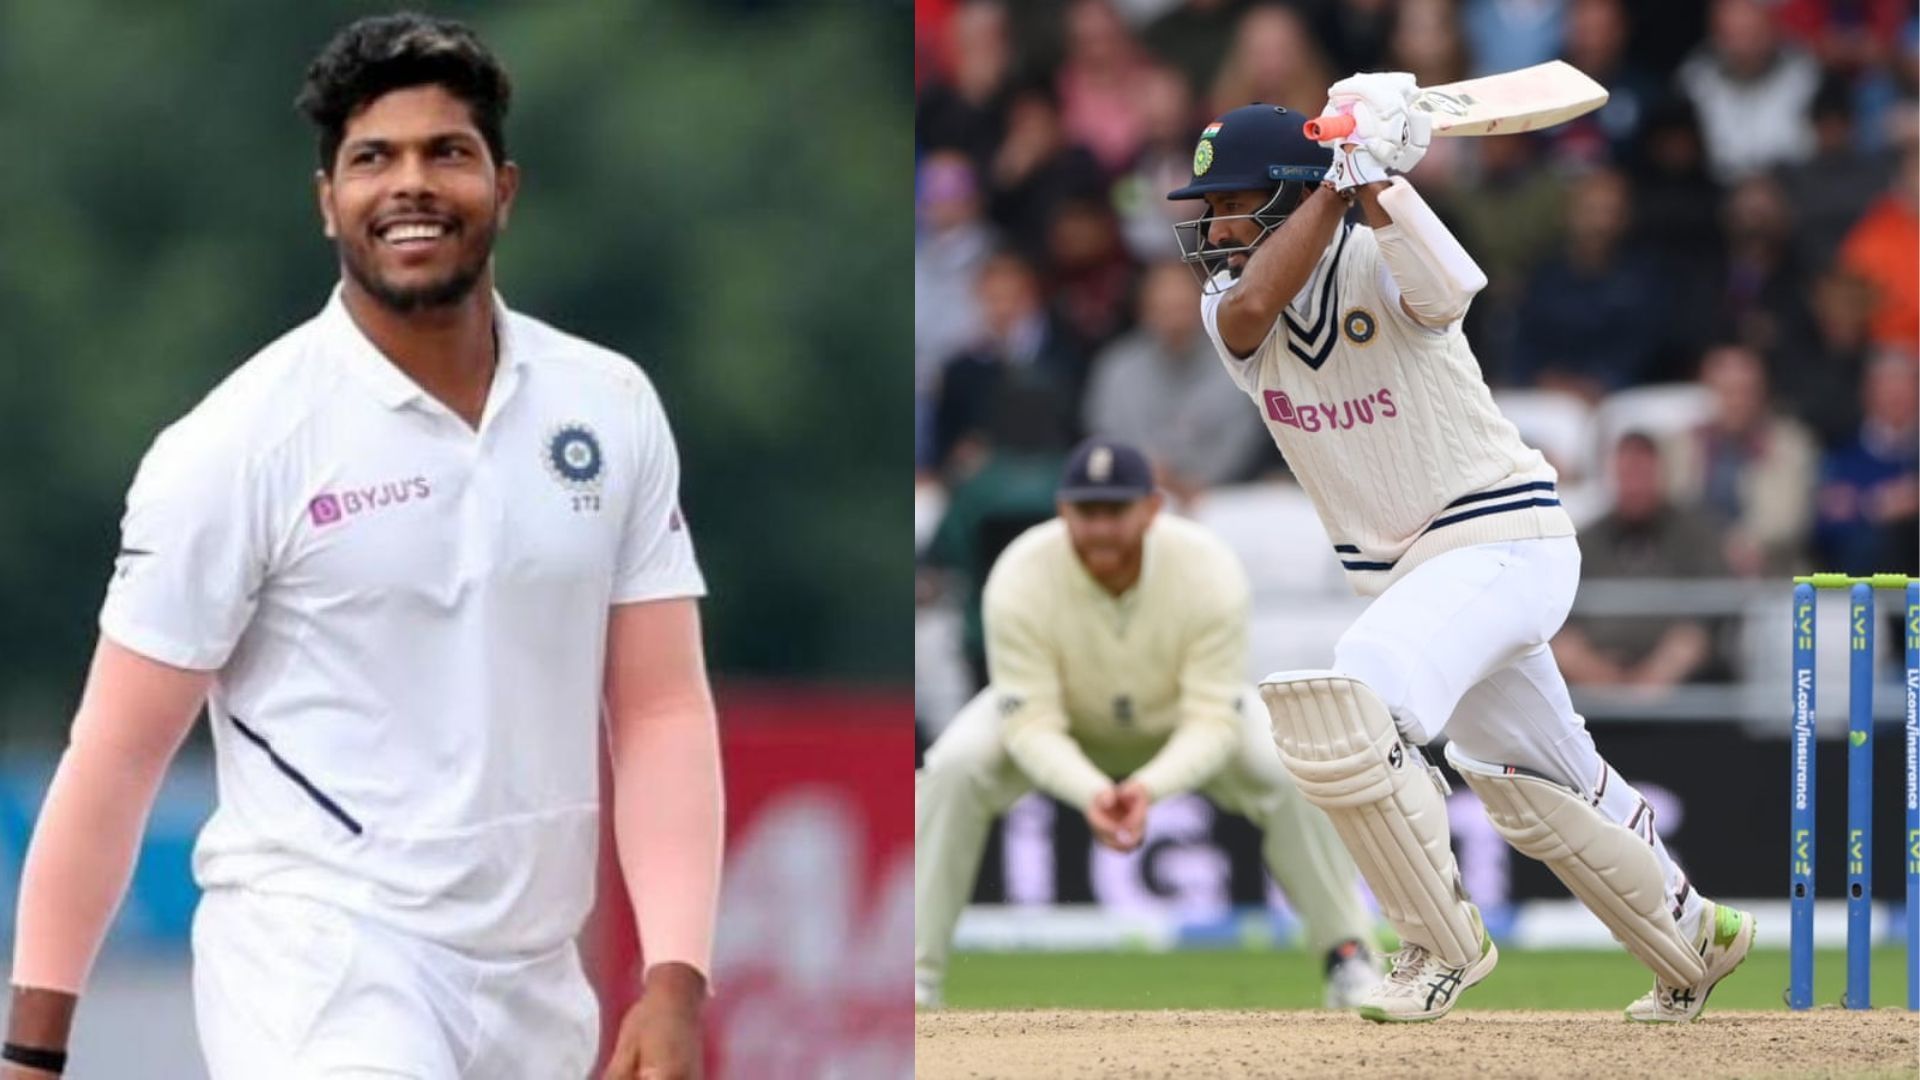 Cheteshwar Pujara and Umesh Yadav likely to be part of India A squad for Bangladesh tour ahead of WTC series - Reports 